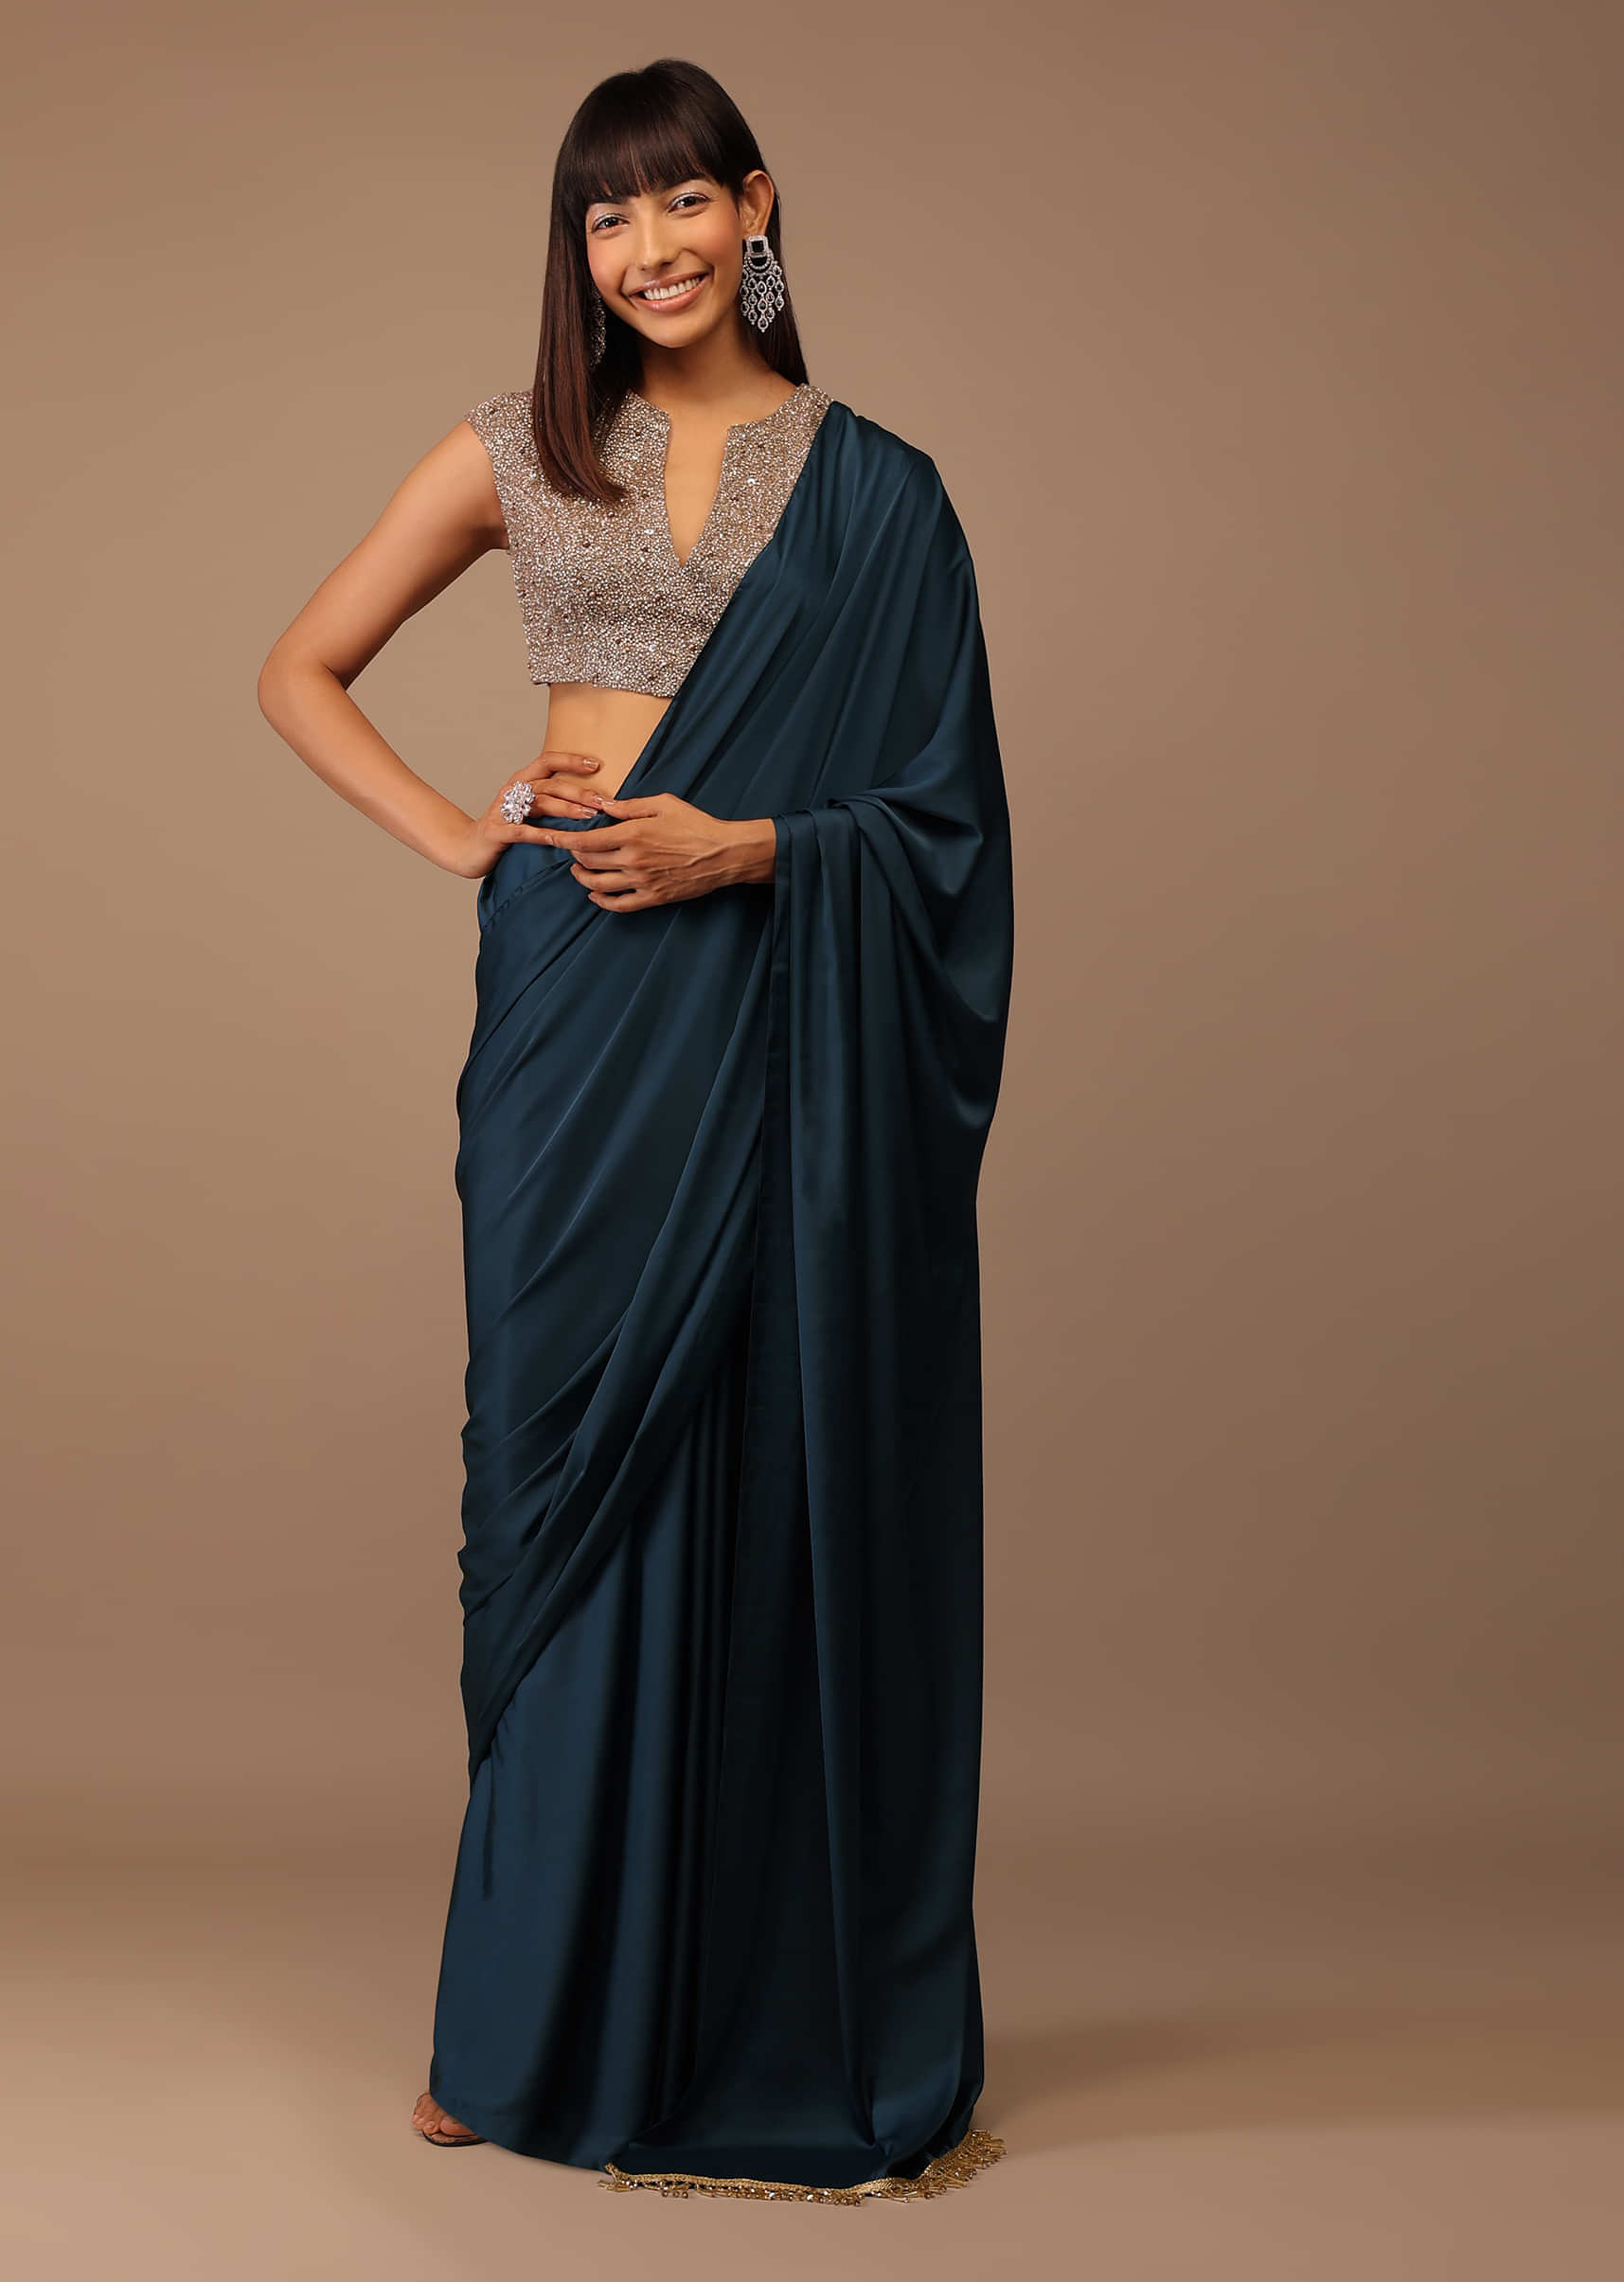 Blue Satin Saree With Fringes On Pallu Matched With V Deep Neck Hand Embroidered Crop Top